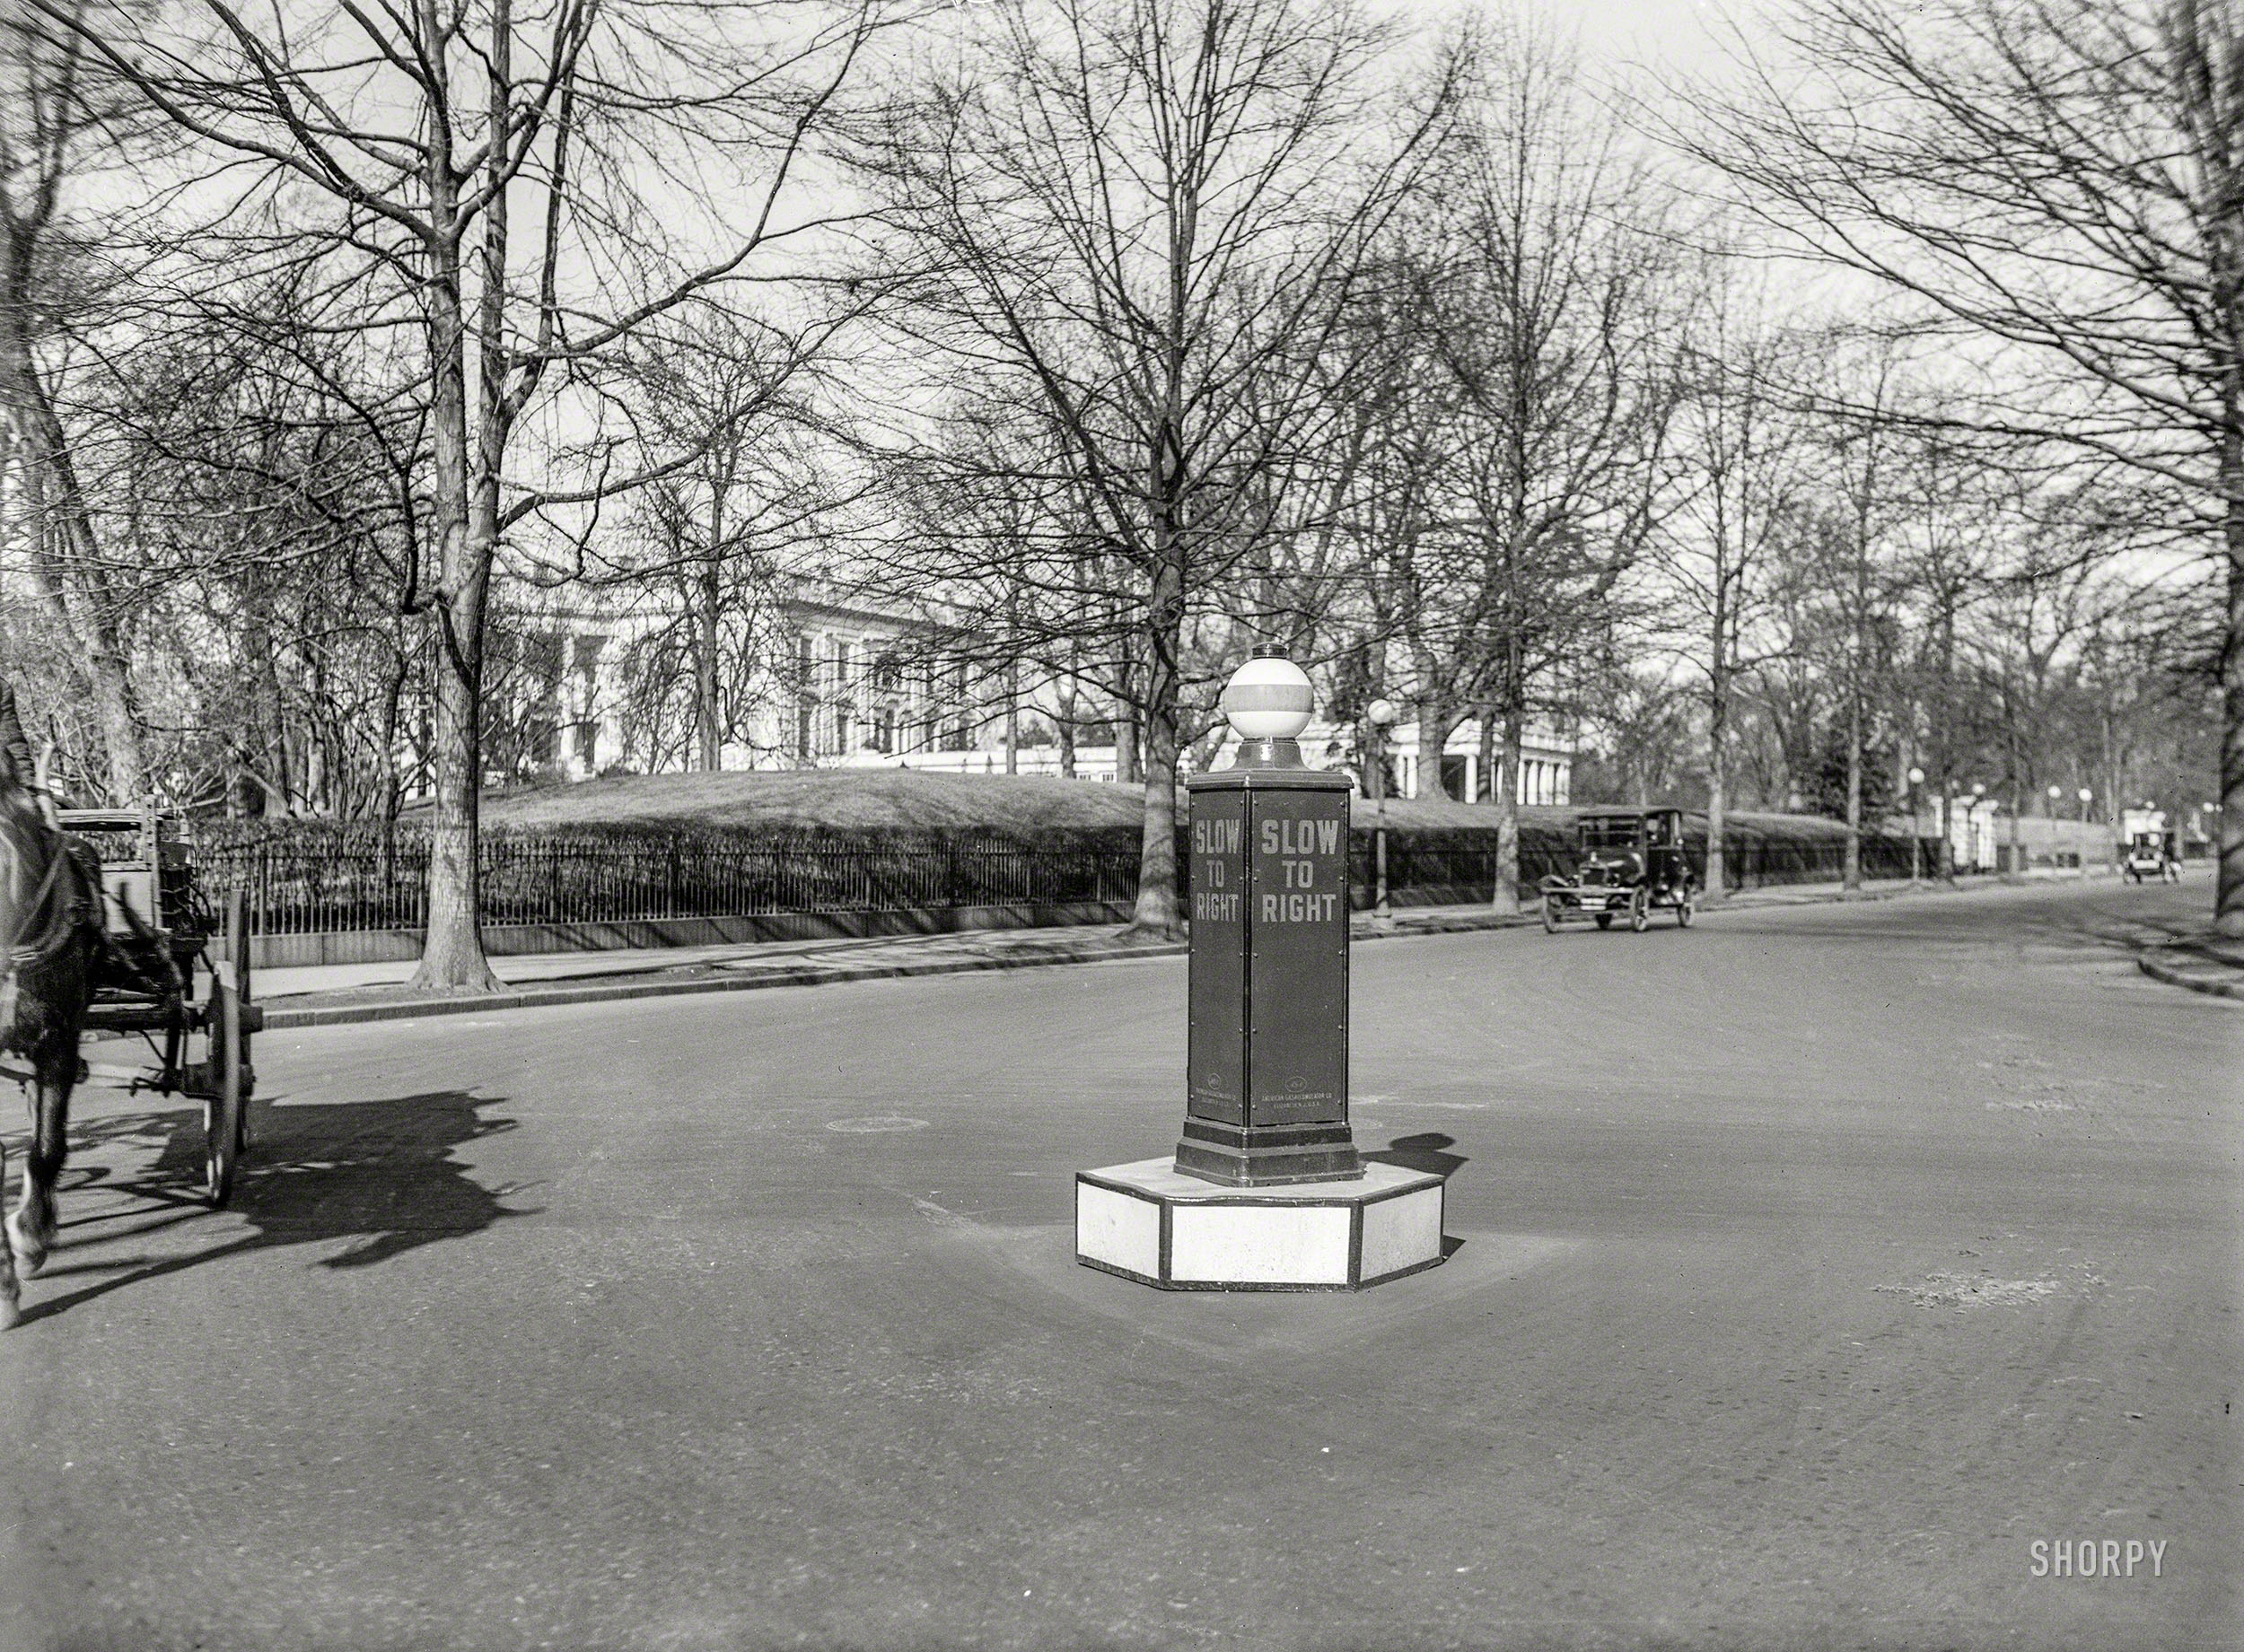 Washington, D.C., circa 1922. "NO CAPTION (Street near White House)." Another of the Harris & Ewing "traffic" photos, this one showing what looks like a wayward gas pump. 5x7 inch glass negative. View full size.